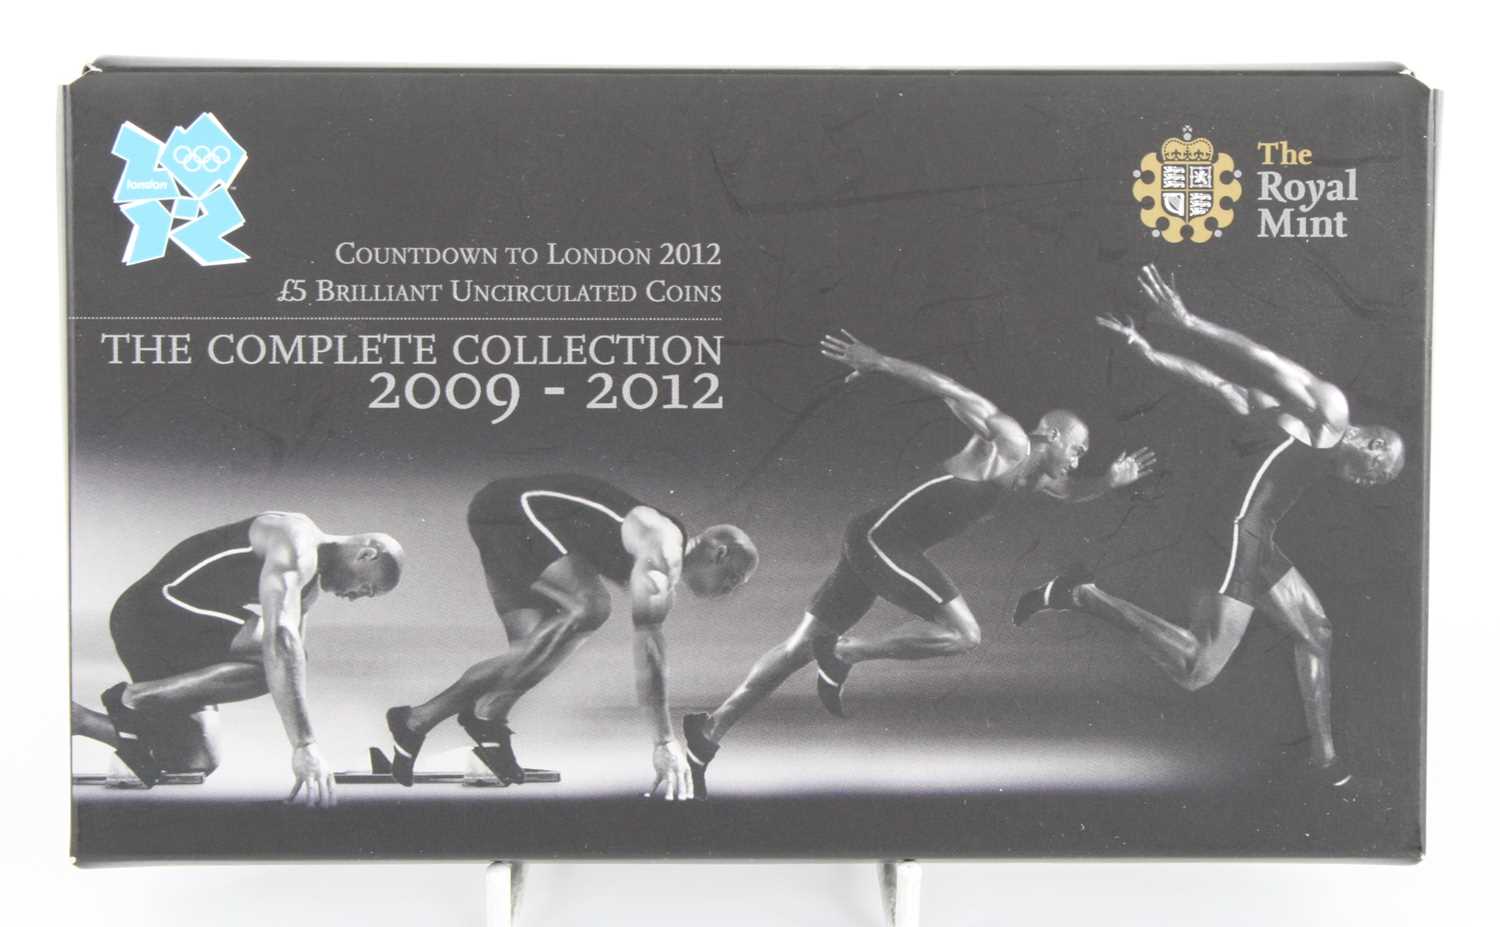 United Kingdom, The Royal Mint, Countdown To London 2012 £5 Brilliant Uncirculated Coins, The